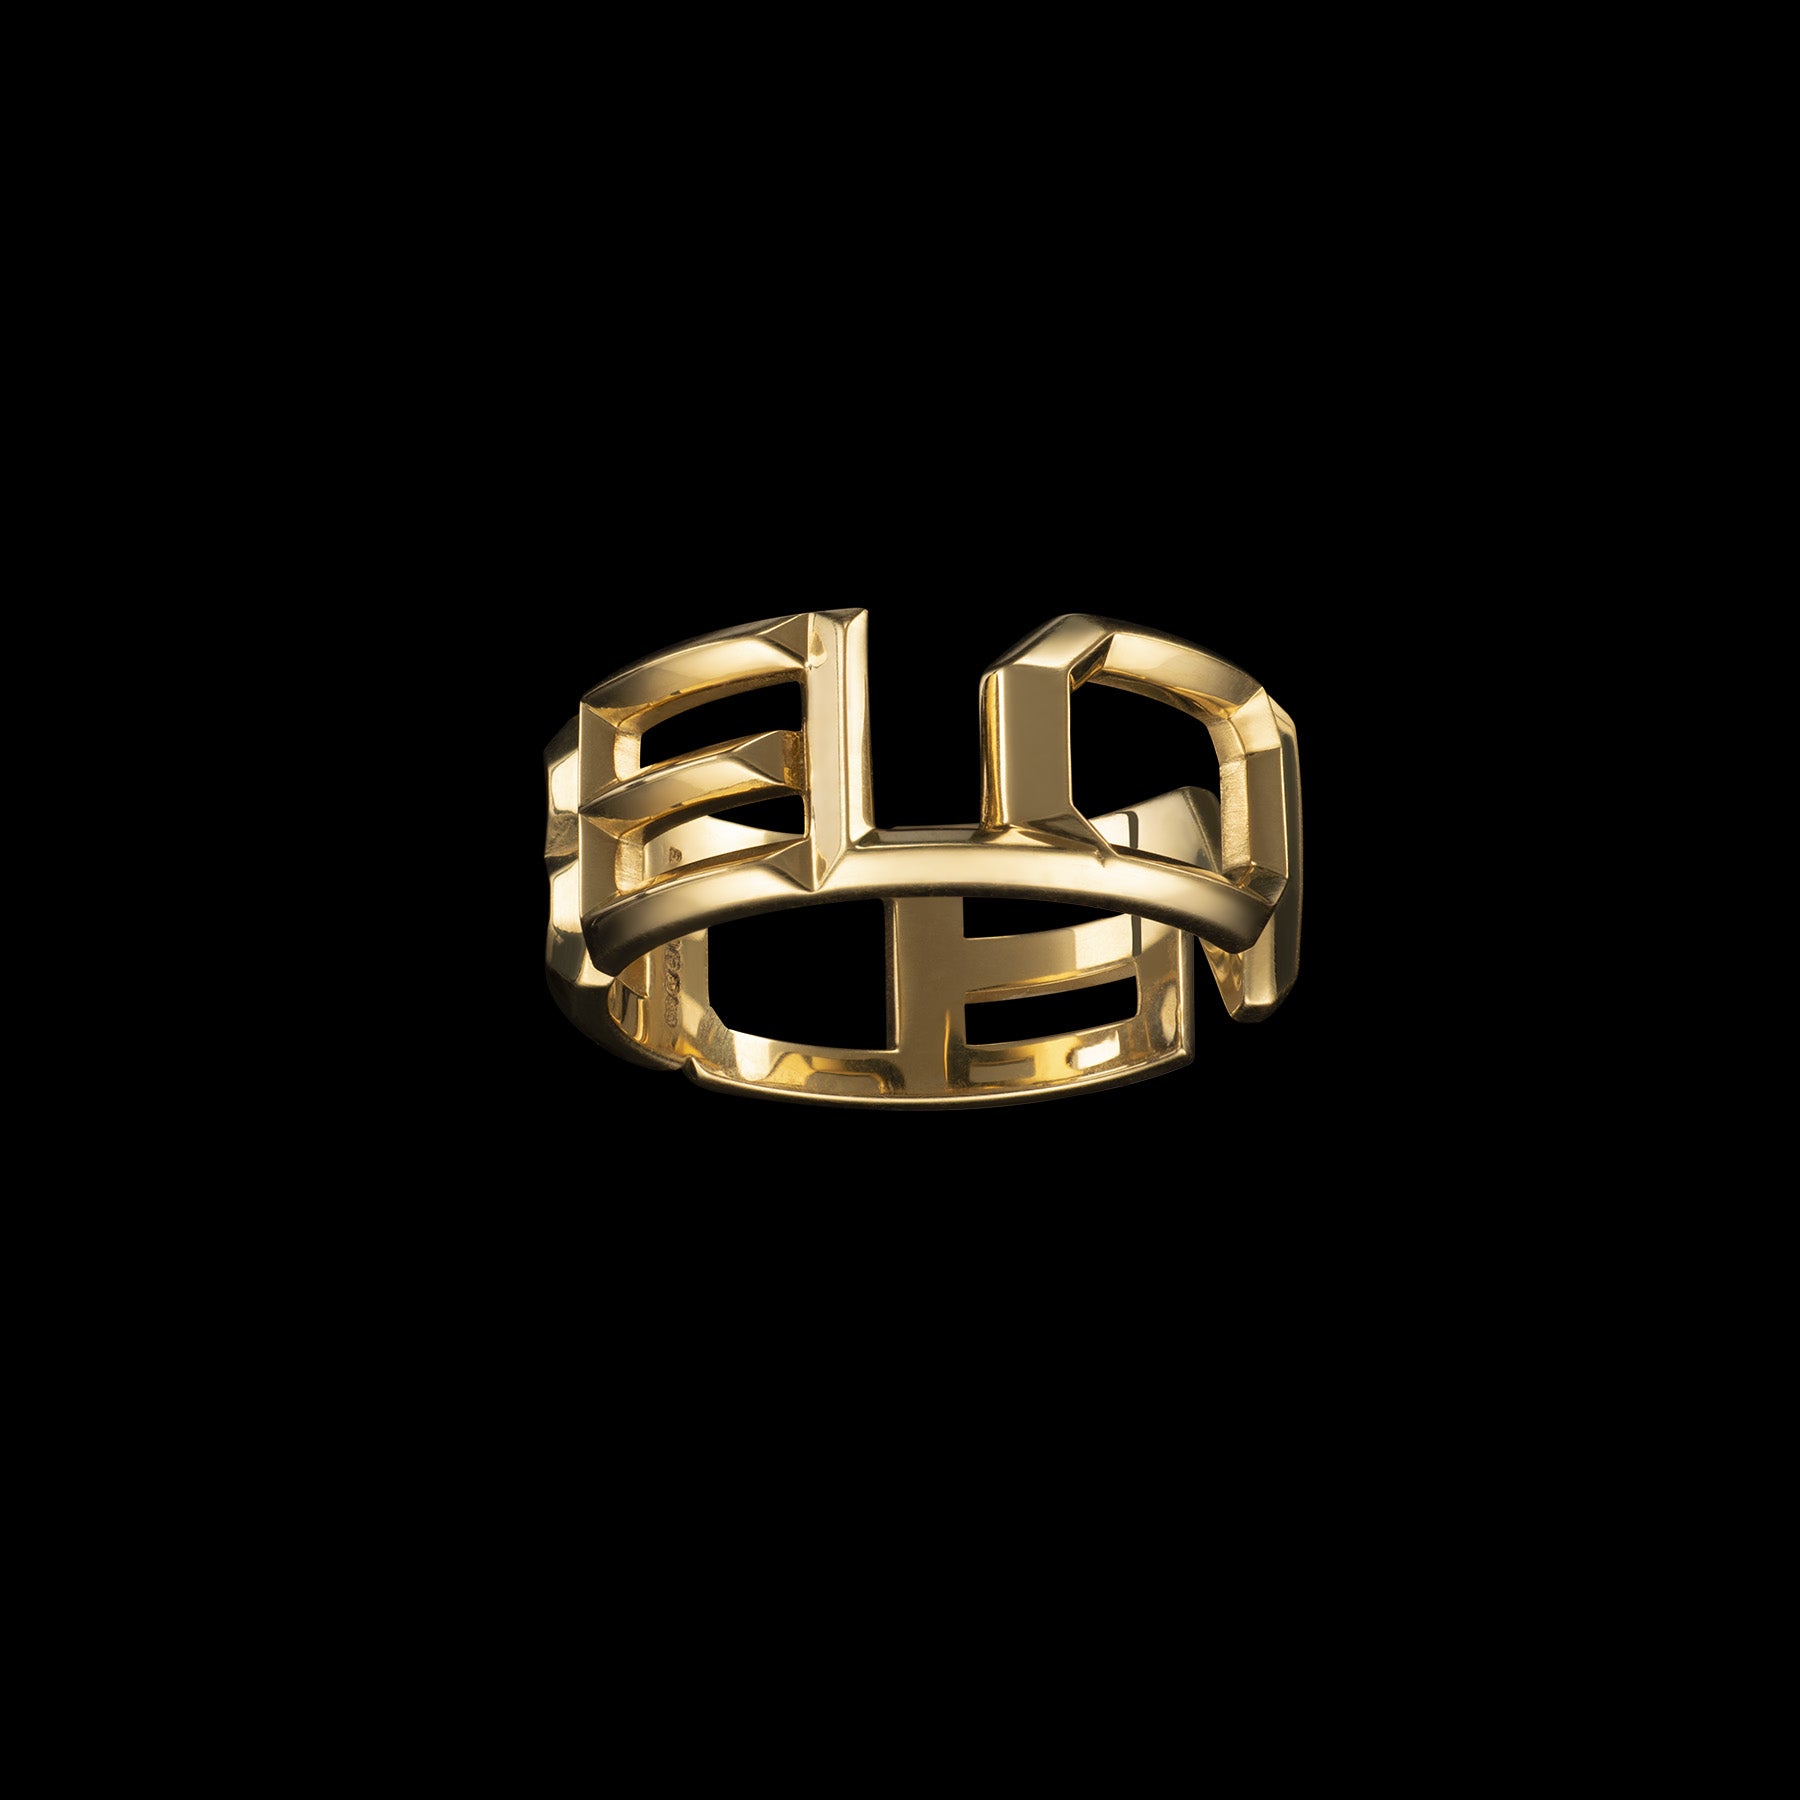 The ‘BELOVED’ ring by designer Solange Azagury-Partridge - 18 karat yellow gold form - front view 1